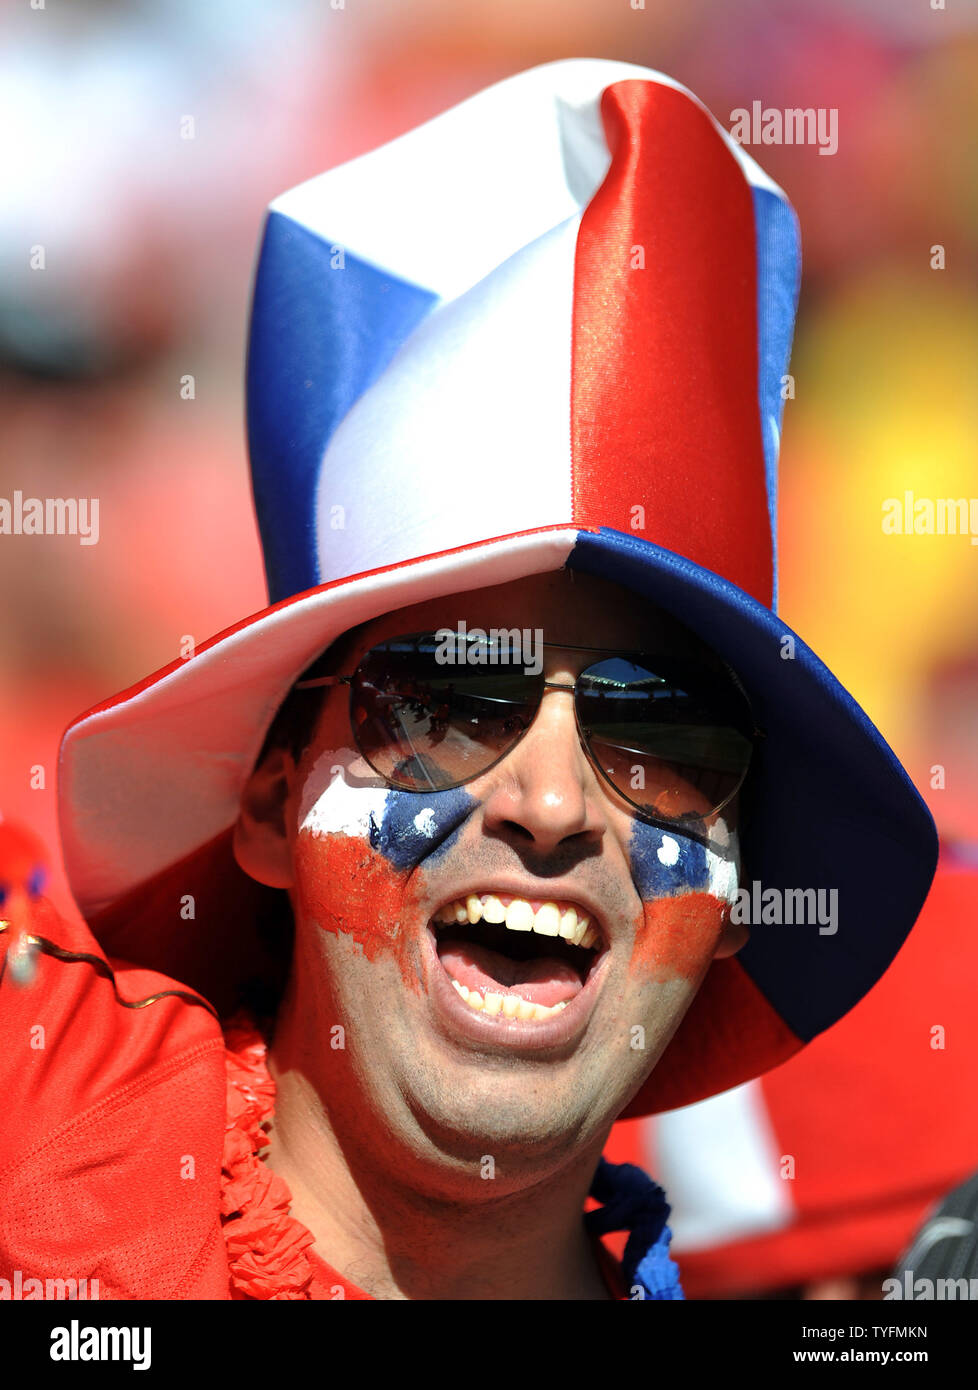 A Chile fan looks on prior to the Group H match at the Mbombela Stadium in Nelspruit, South Africa on June 16, 2010. UPI/Chris Brunskill Stock Photo